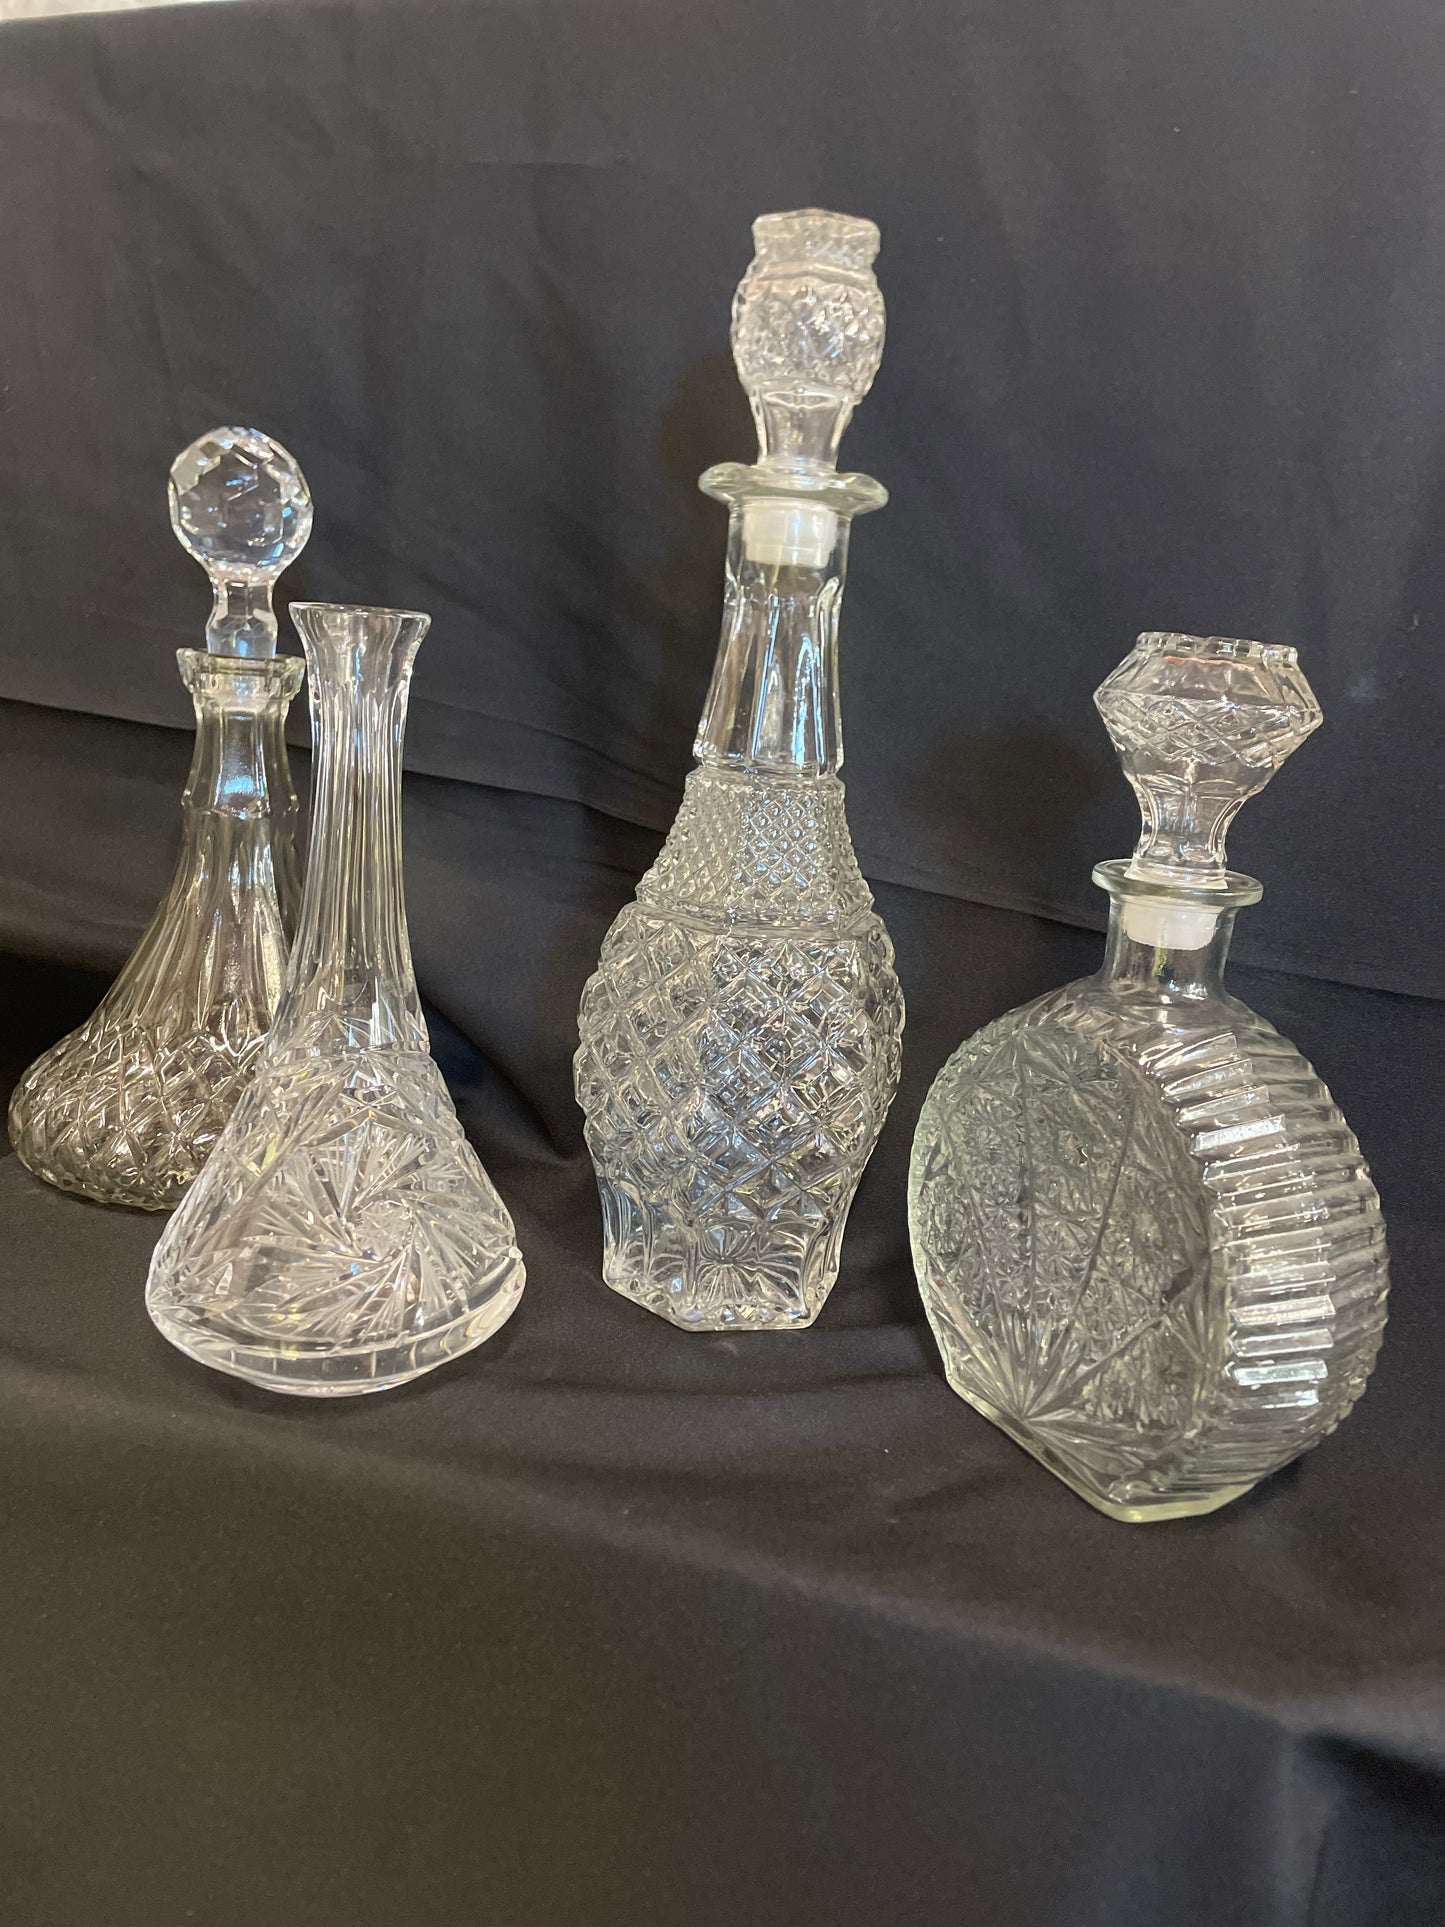 Vases “Collection Crystal”